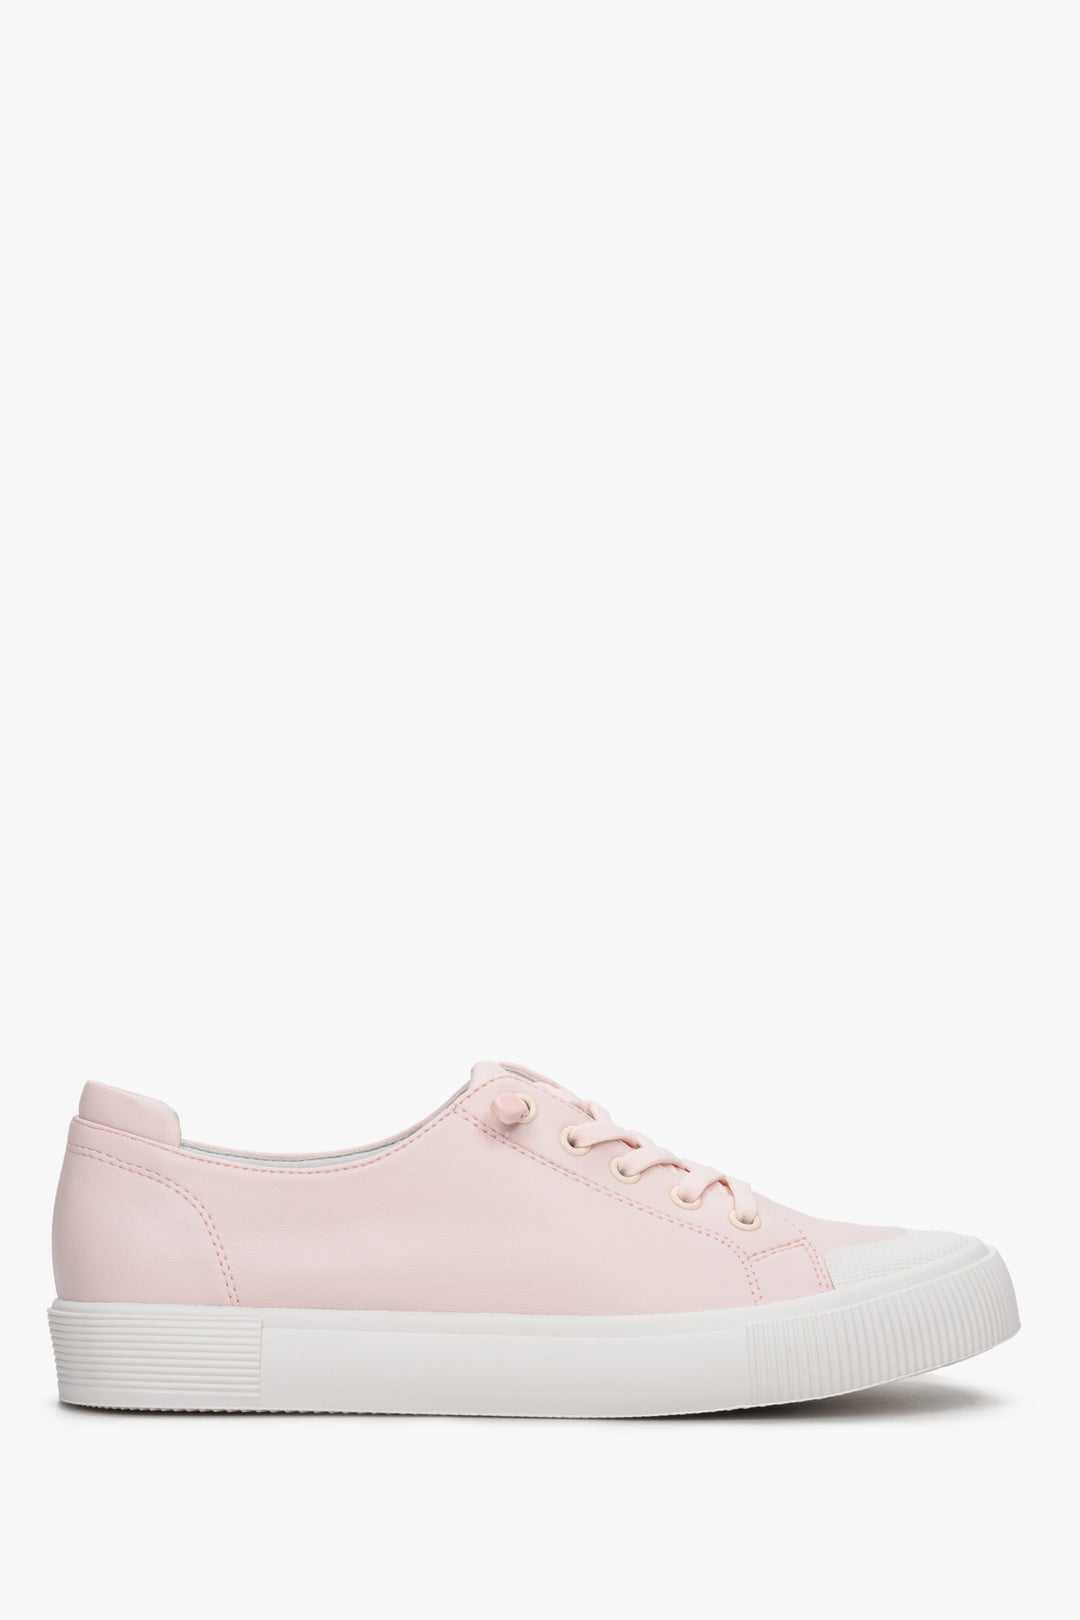 Women's Light Pink Sneakers made of Genuine Leather Estro ER00112701.